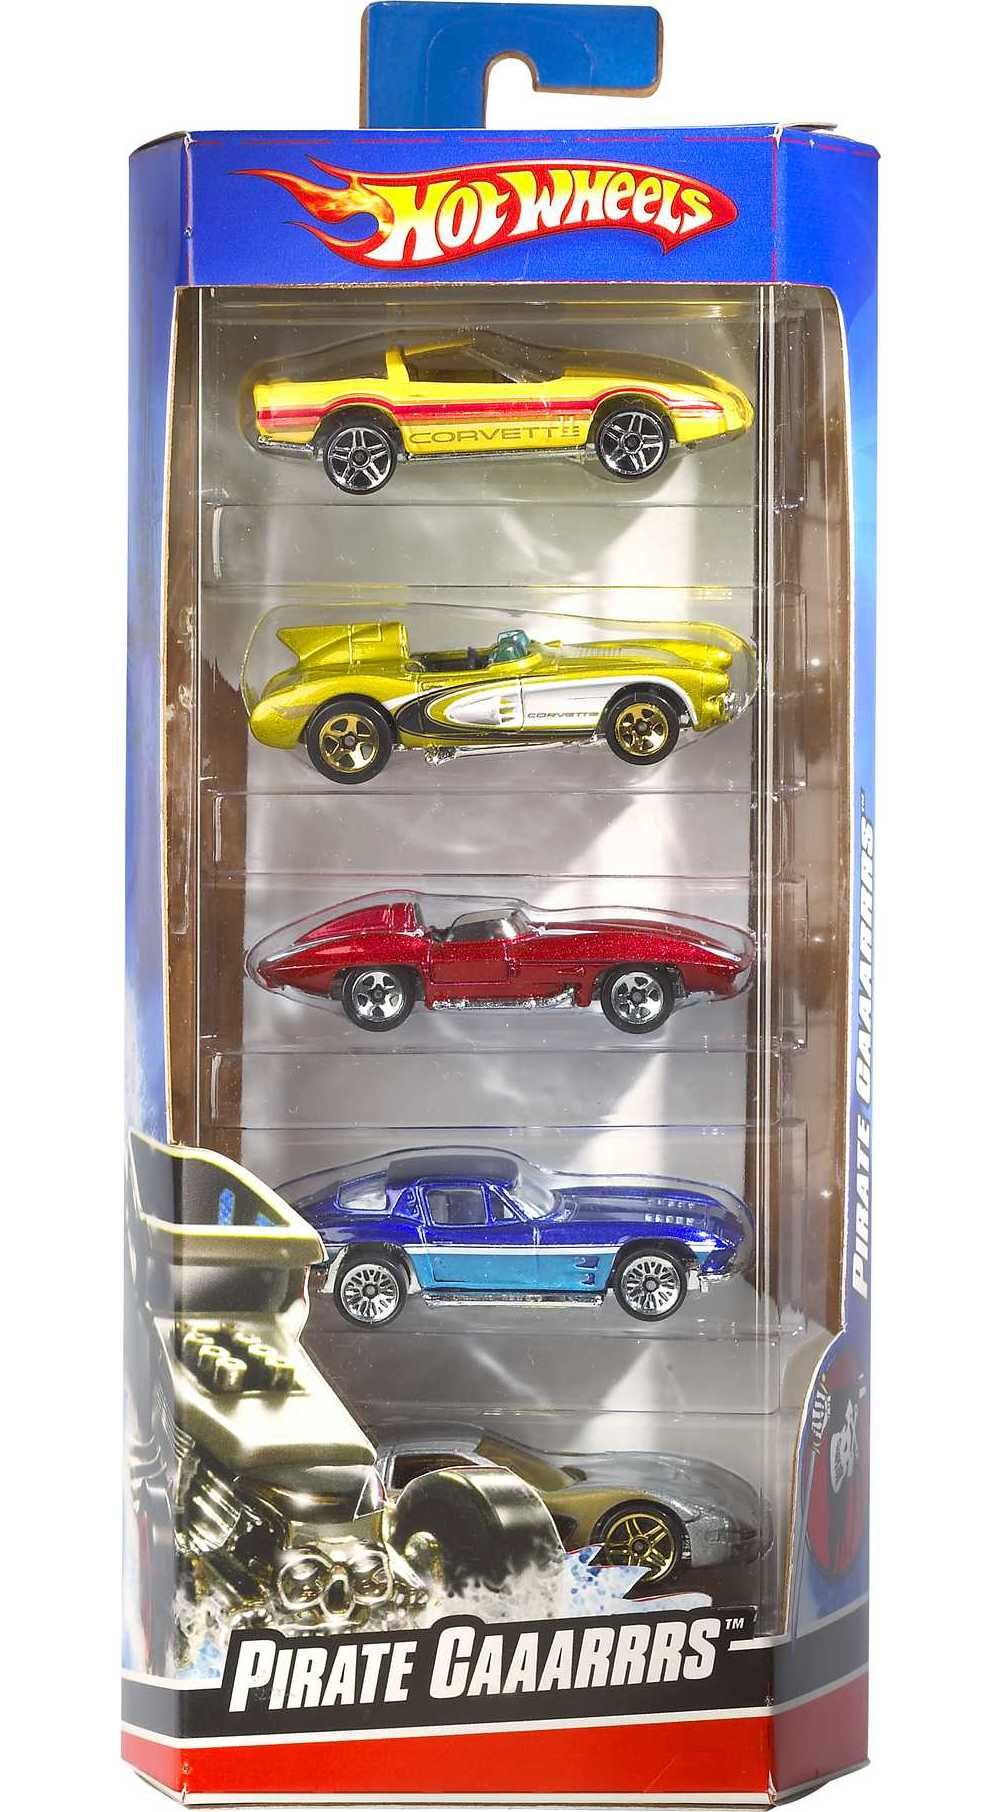 Hot Wheels Cars, 5-Pack of Die-Cast Toy Cars or Trucks in 1:64 Scale (Styles May Vary) - image 1 of 7